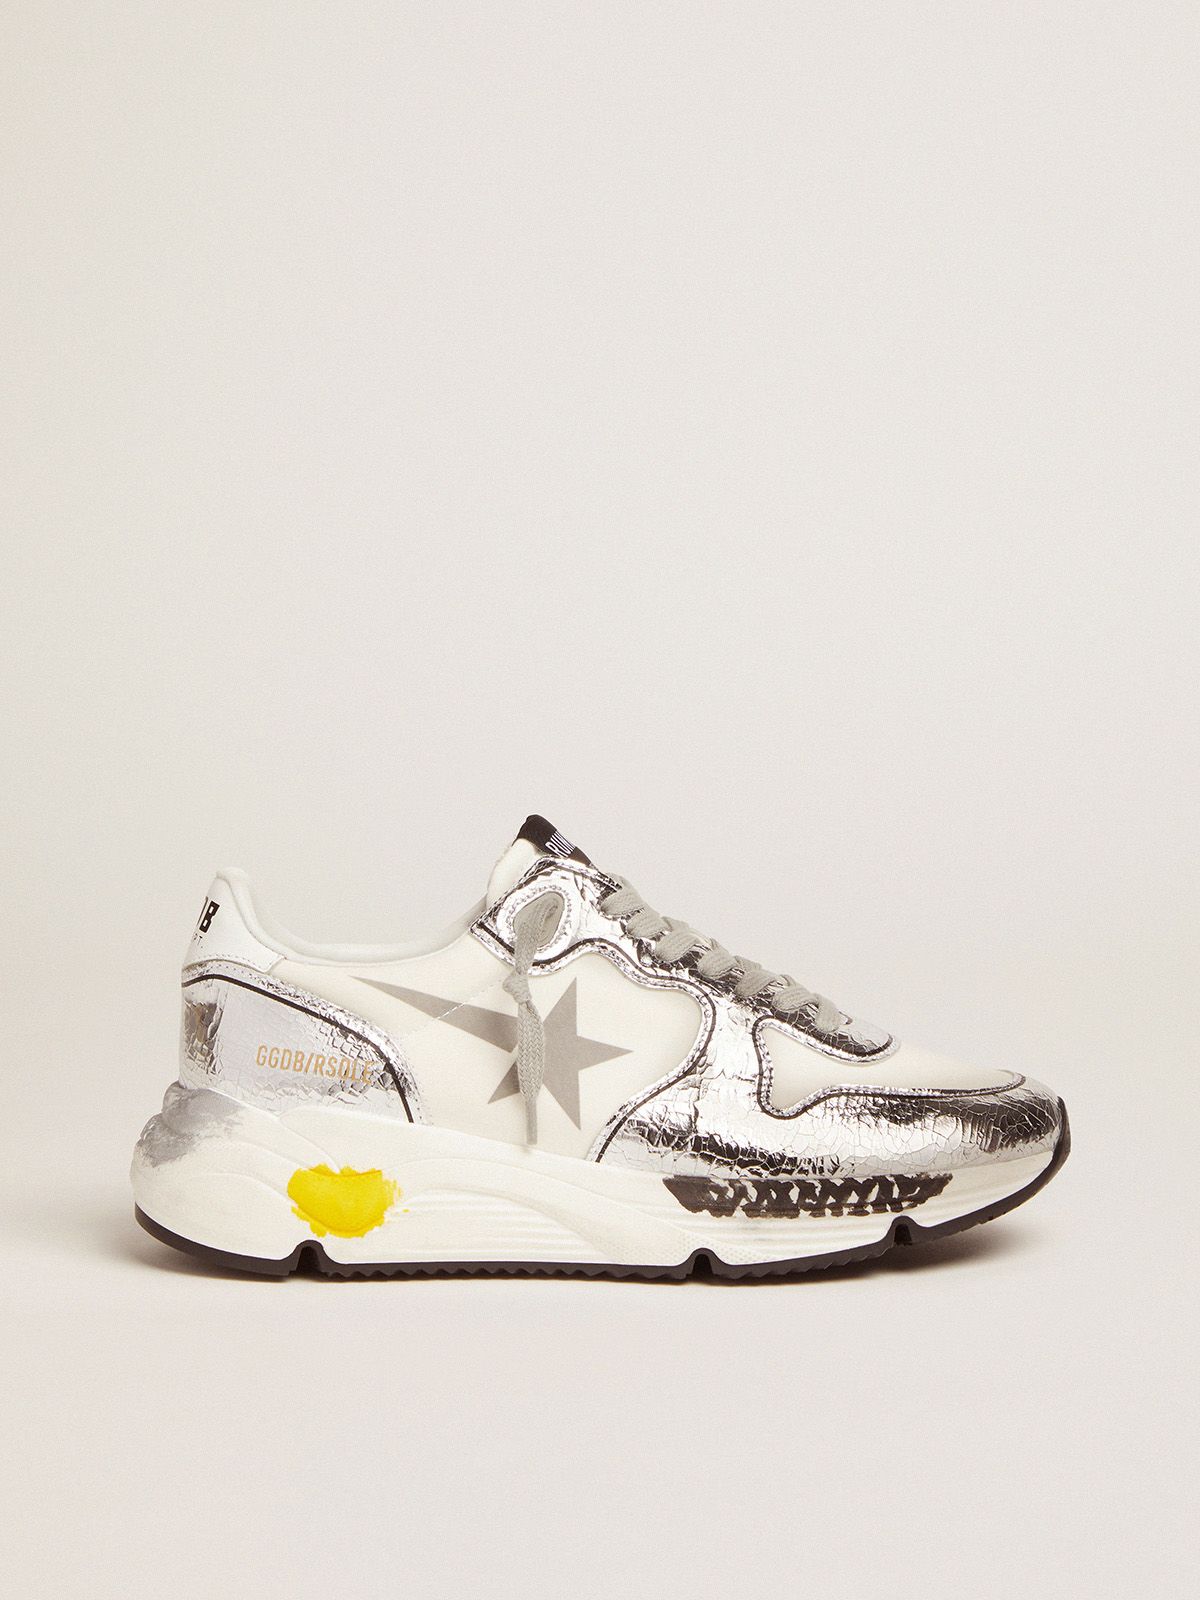 golden goose Silver Sole and sneakers white Running